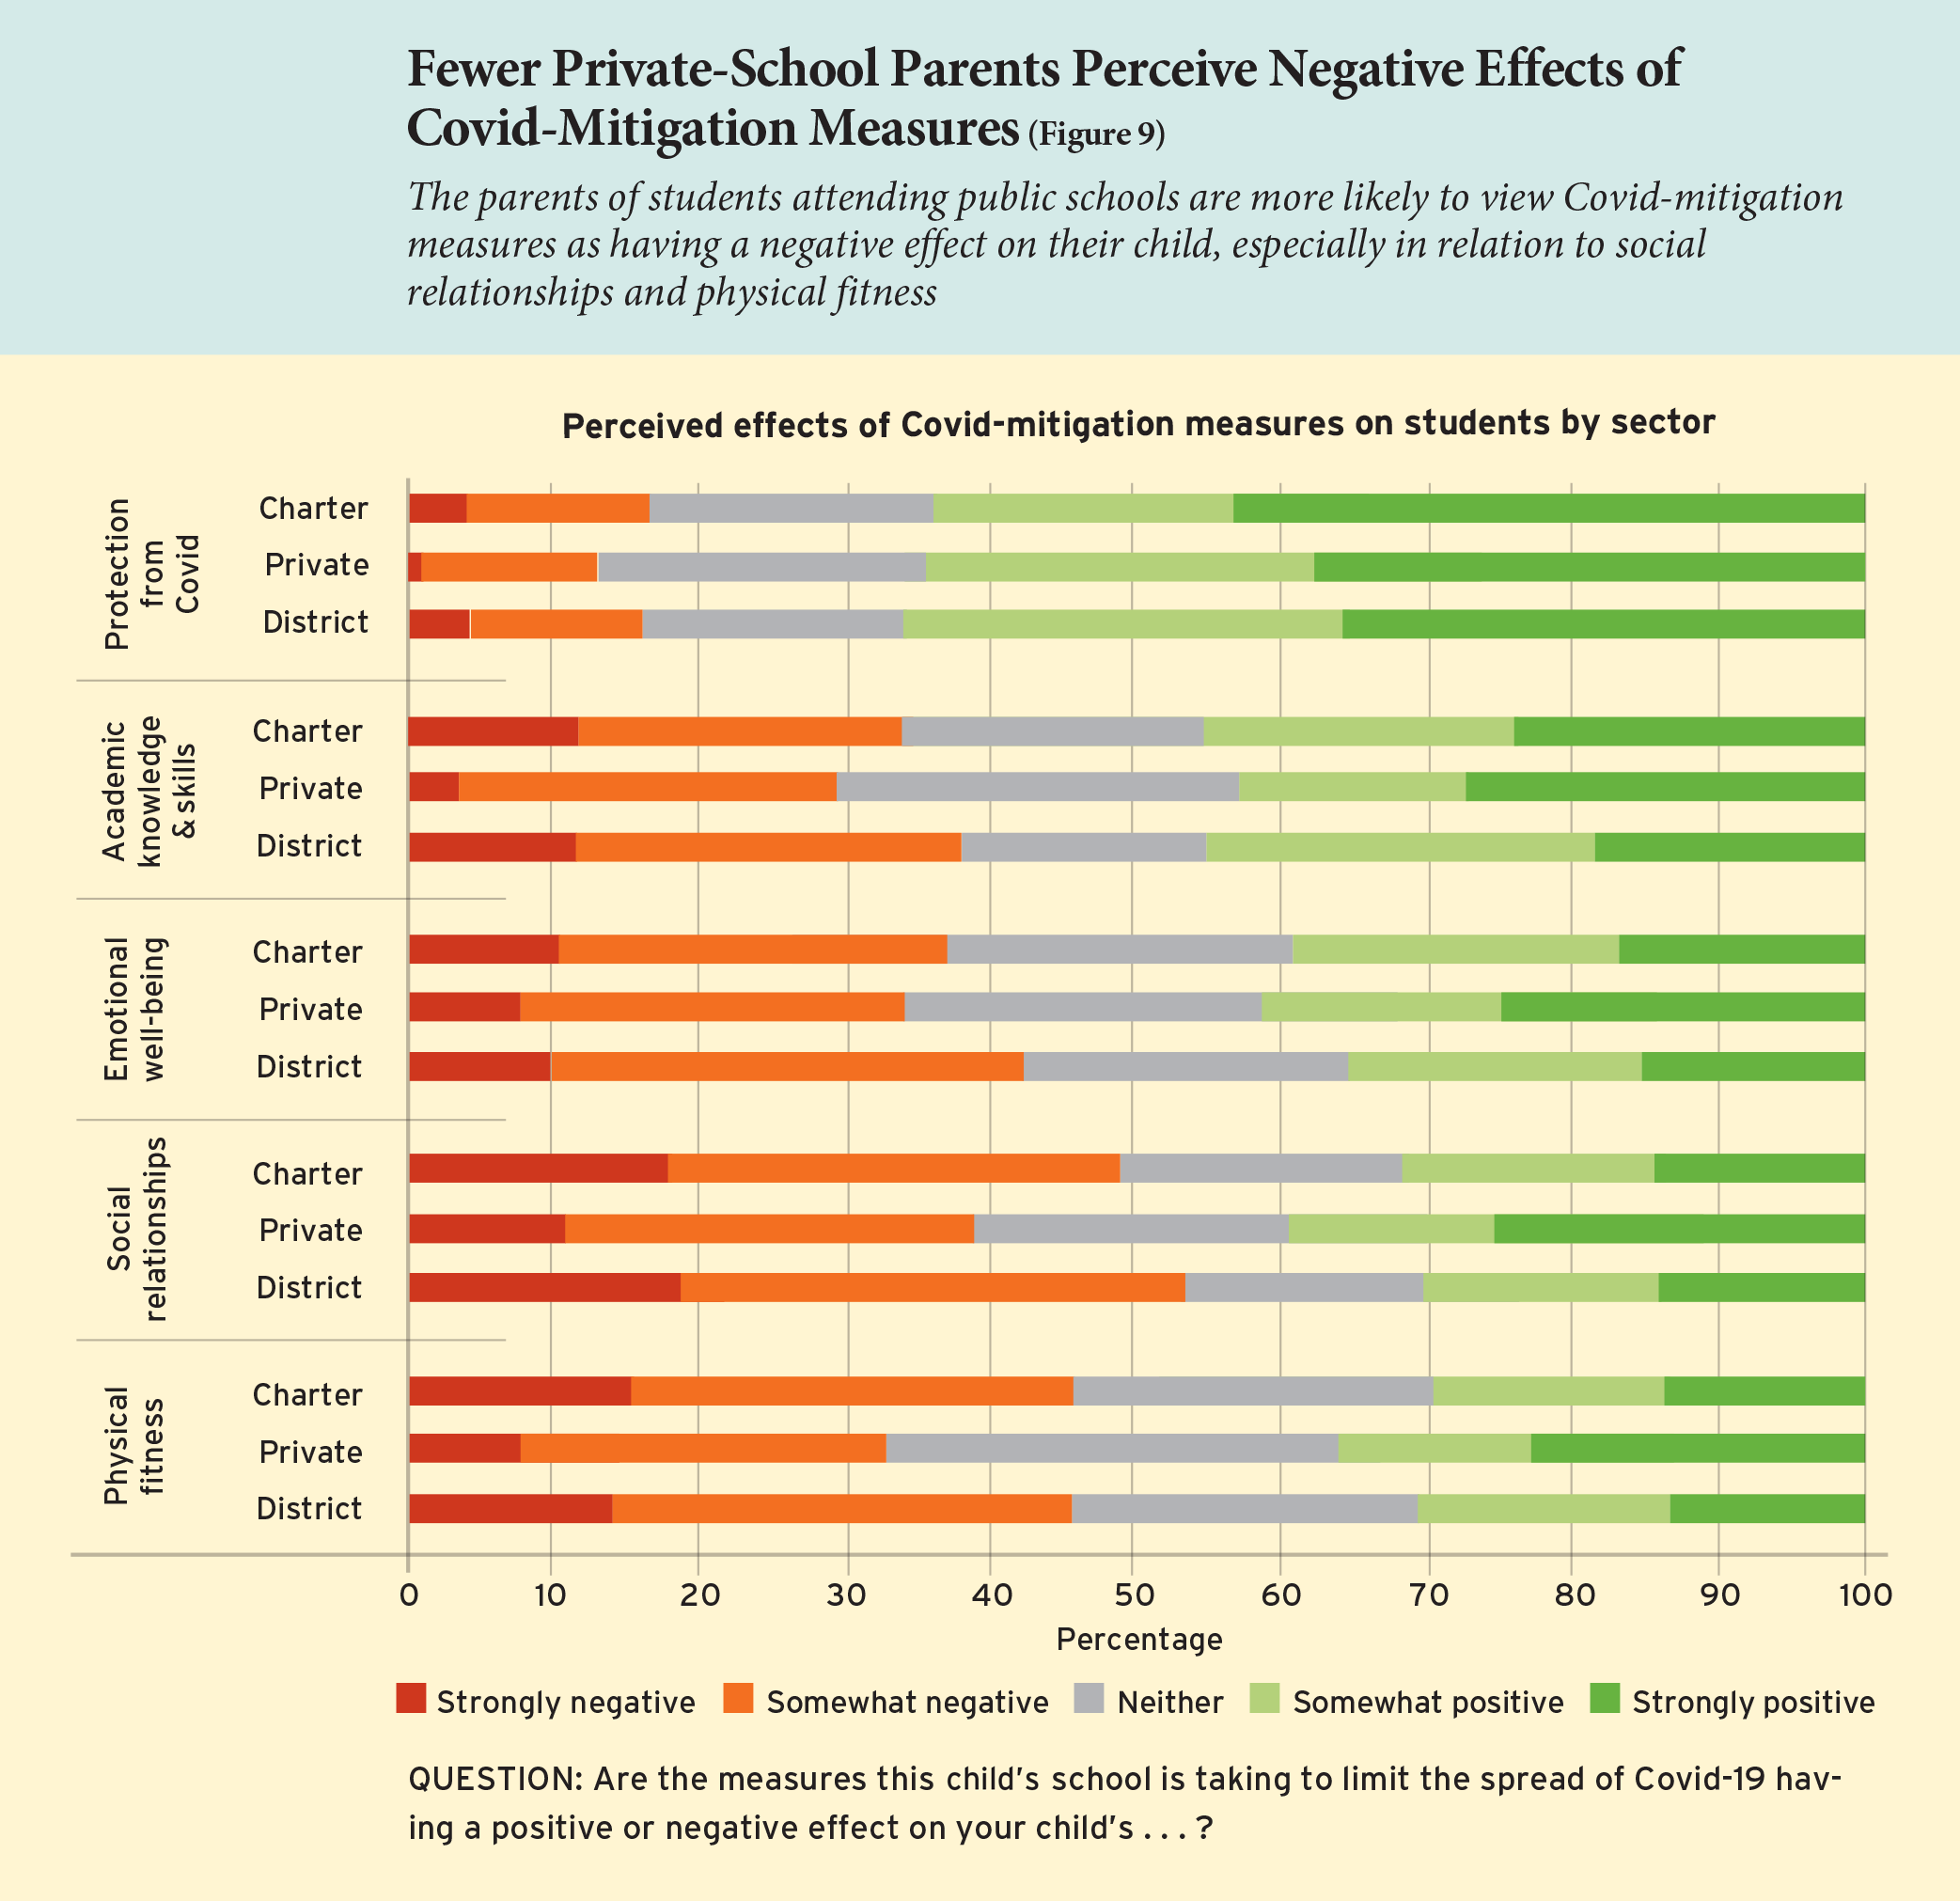 Fewer Private-School Parents Perceive Negative Effects of Covid-Mitigation Measures (Figure 9)